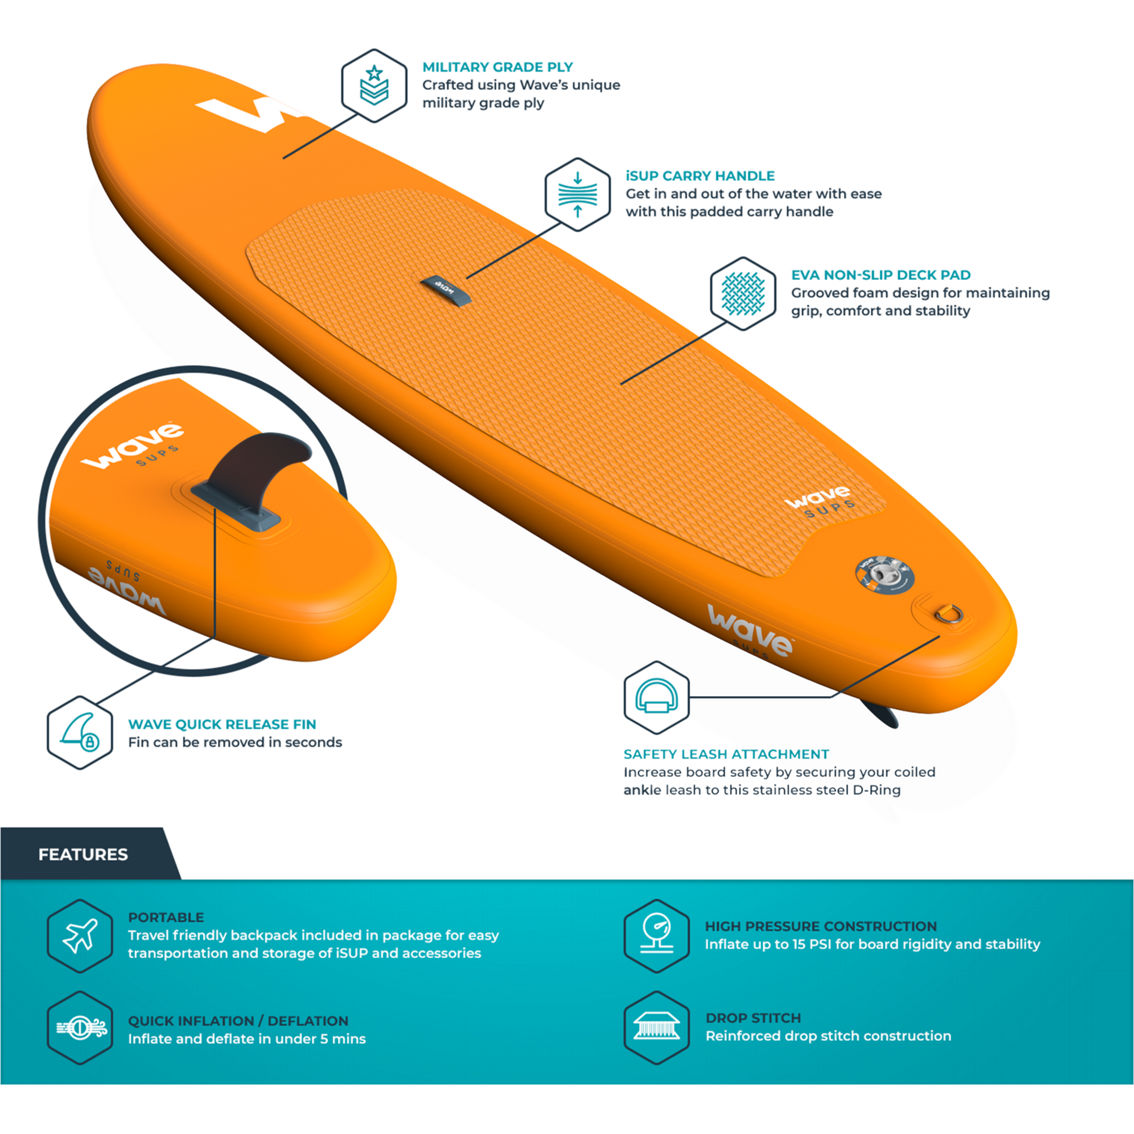 WAVE Direct 10 ft. Wave Cruiser Sup Package - Image 4 of 5